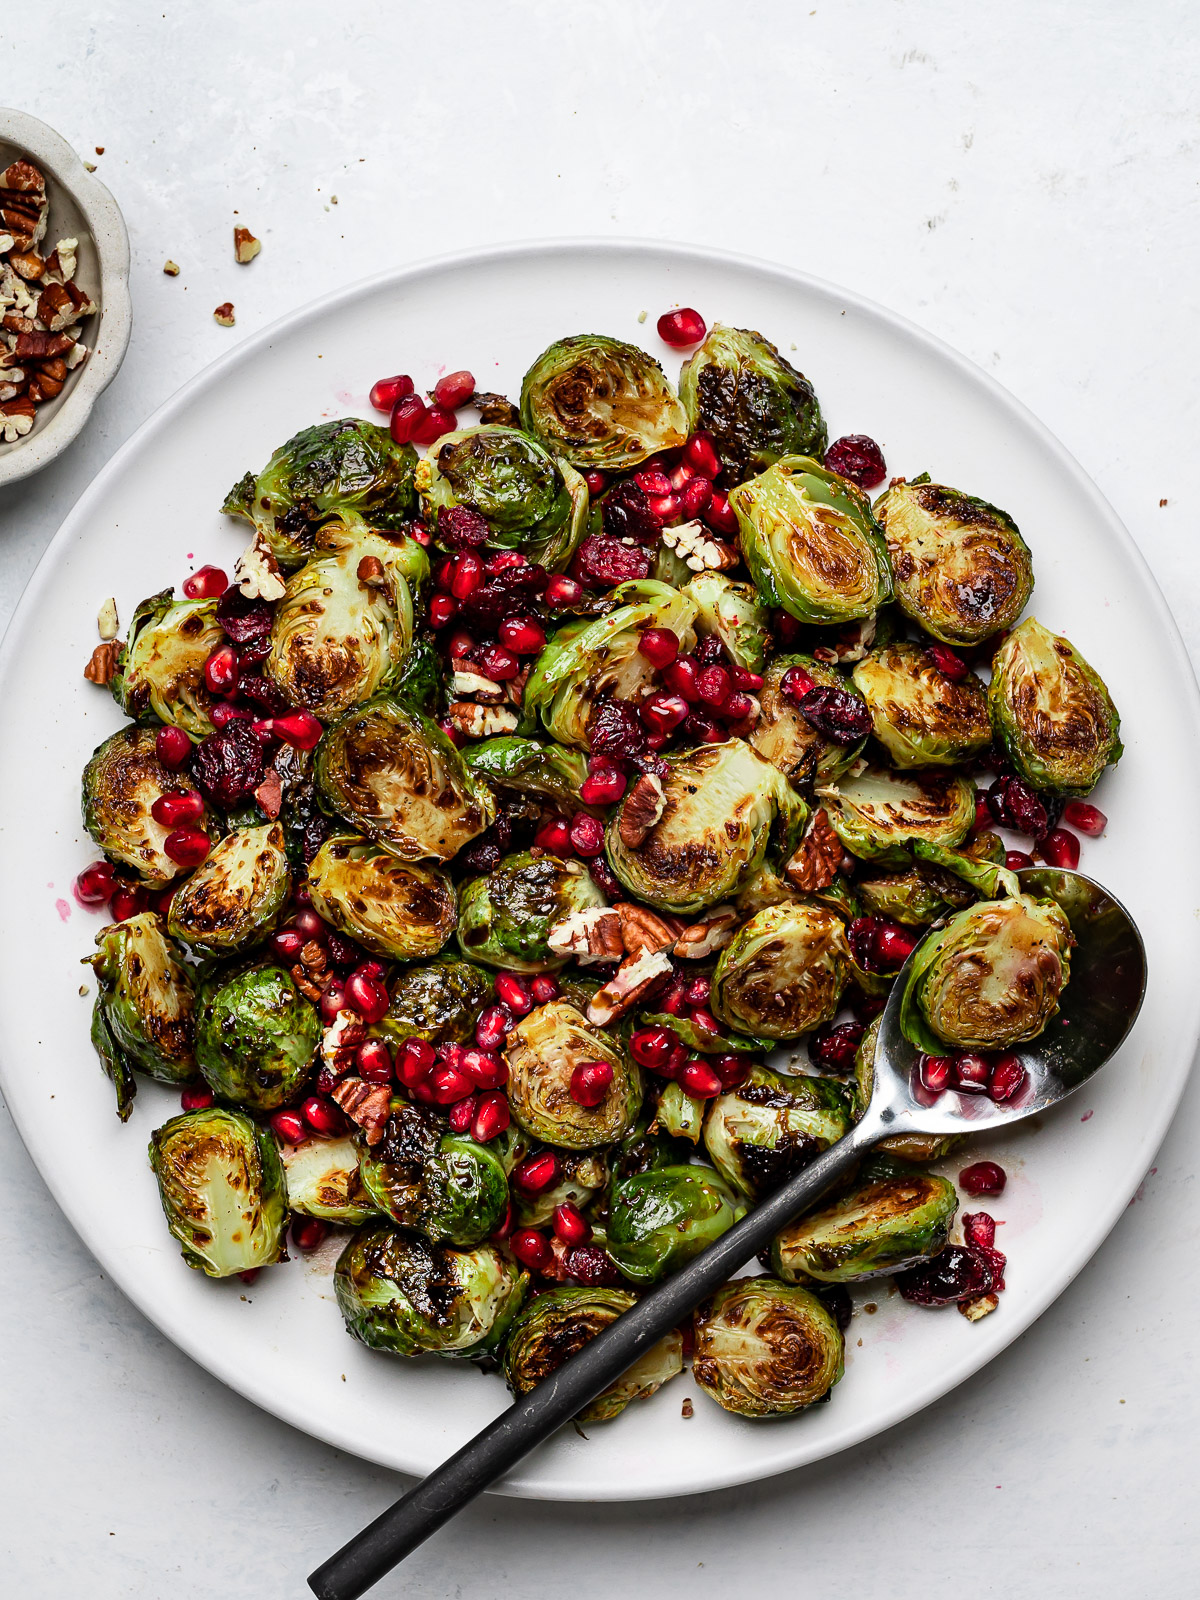 Roasted Brussels Sprouts with Balsamic-Garlic Glaze